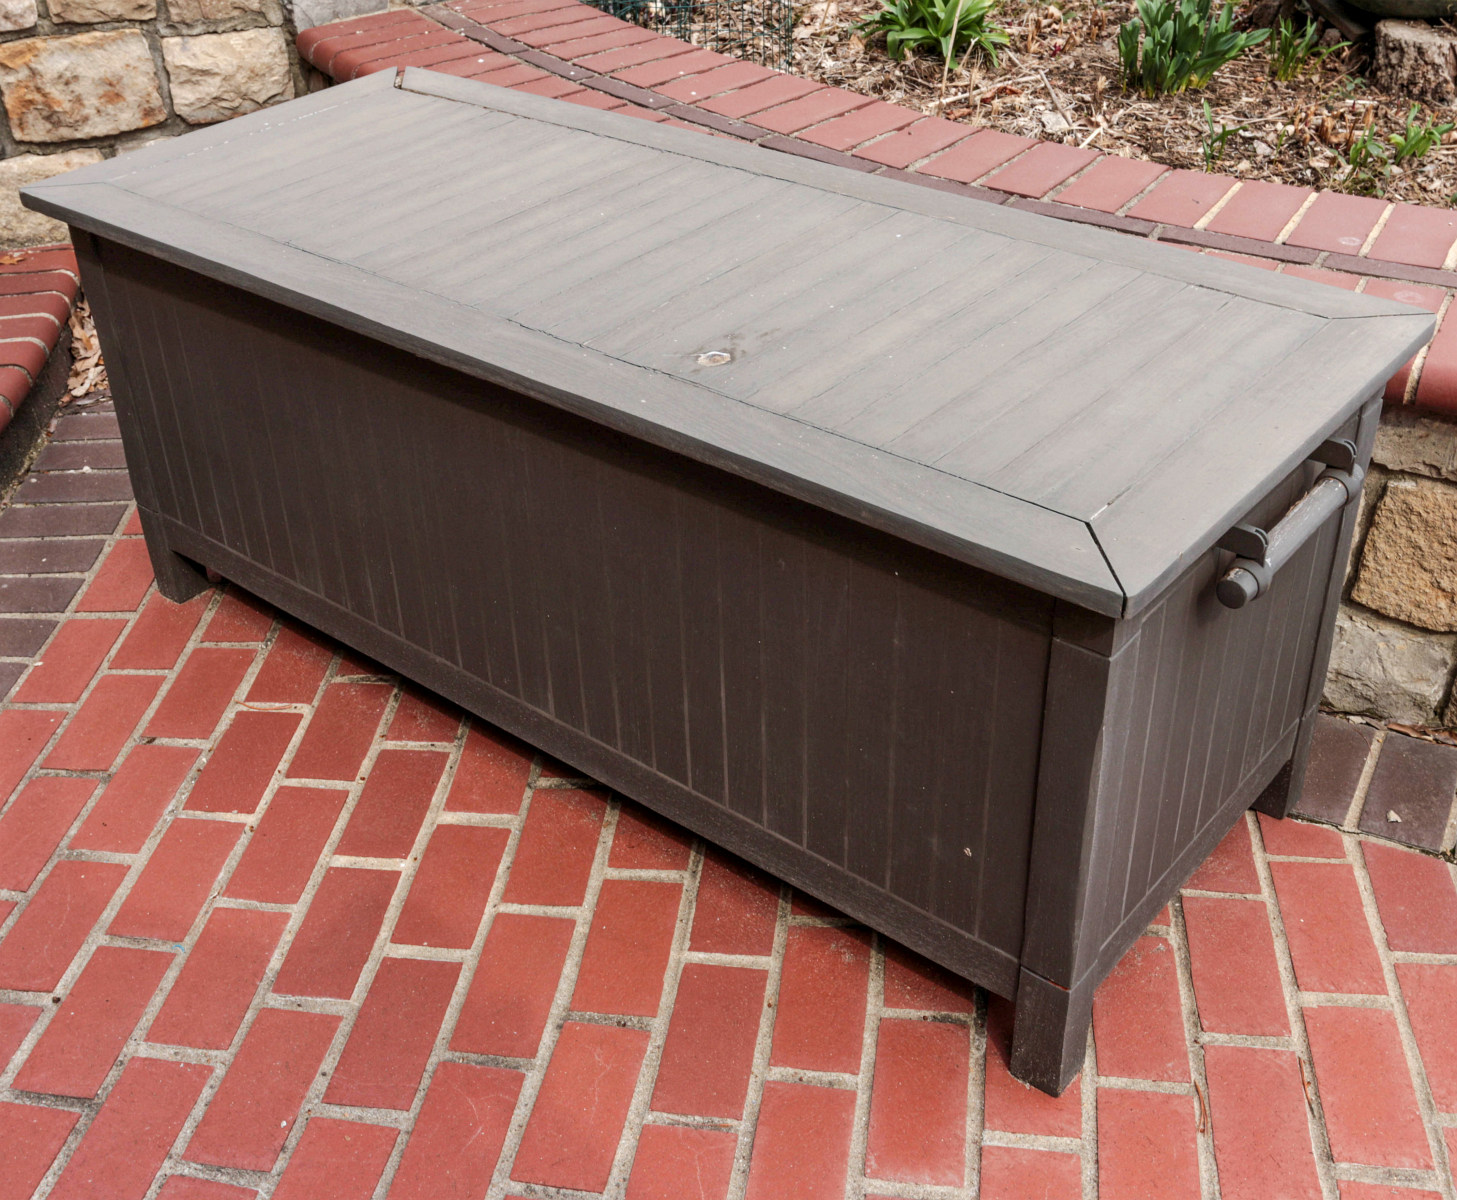 A WOOD OUTDOOR STORAGE CHEST